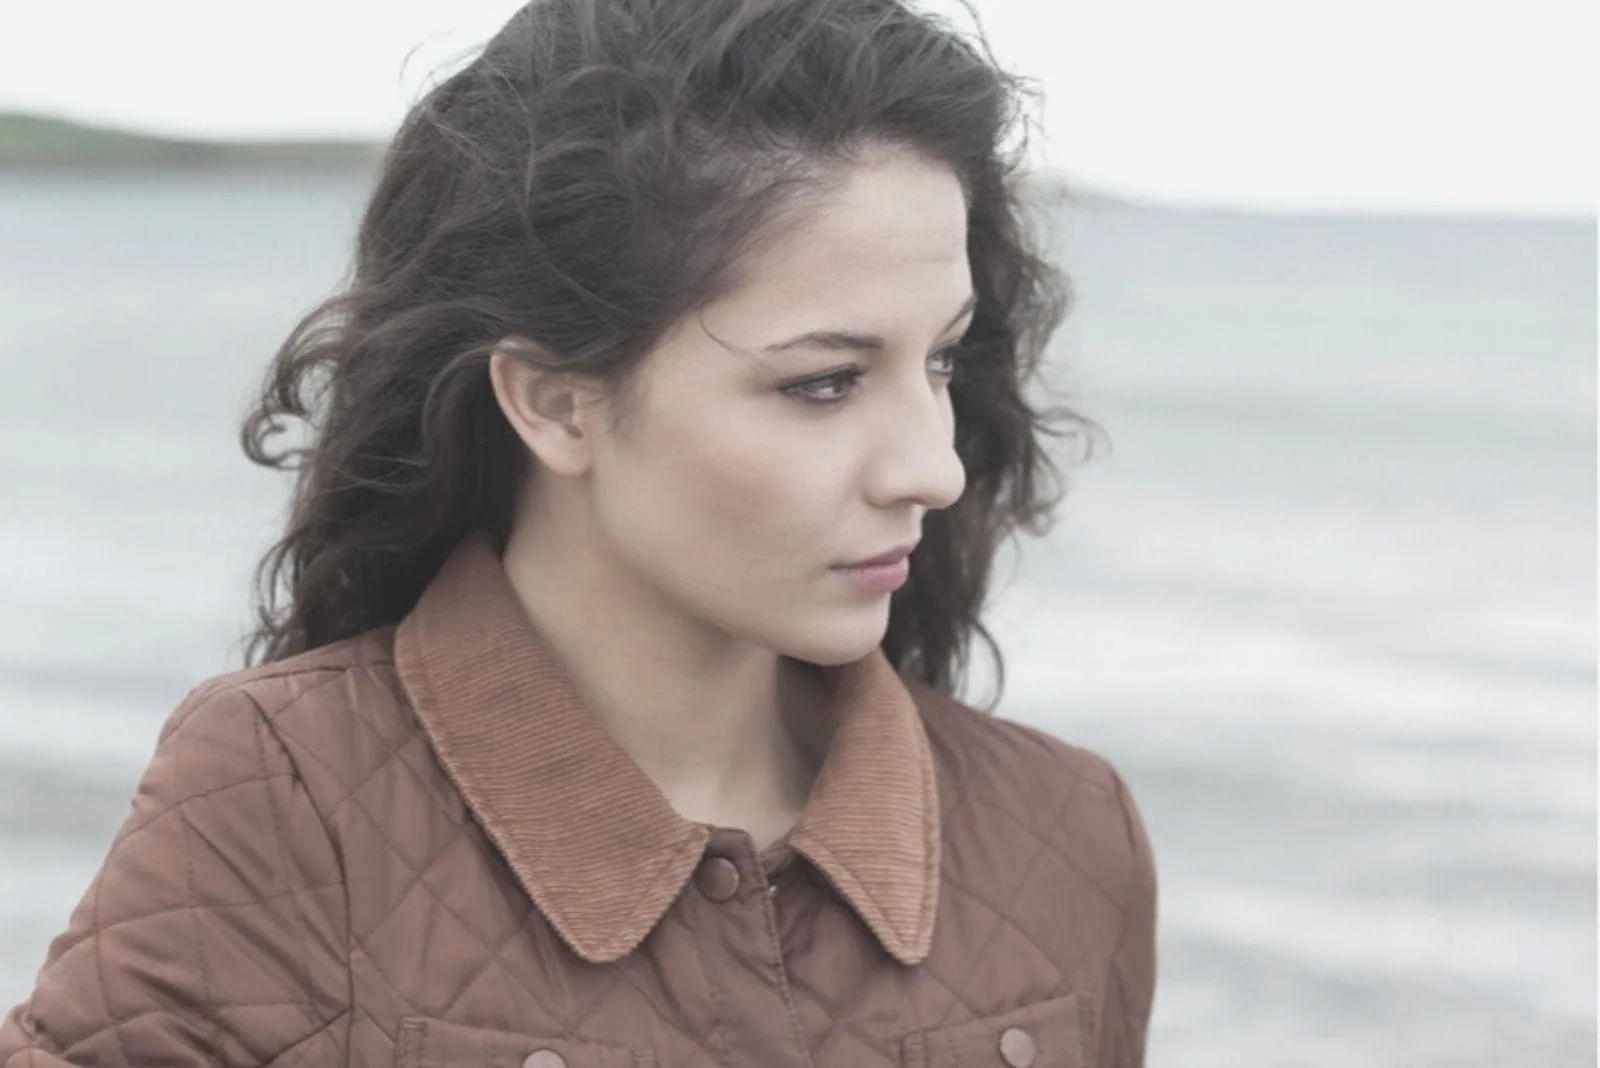 young woman thoughtful and looking at the sea wearing coat in close up image